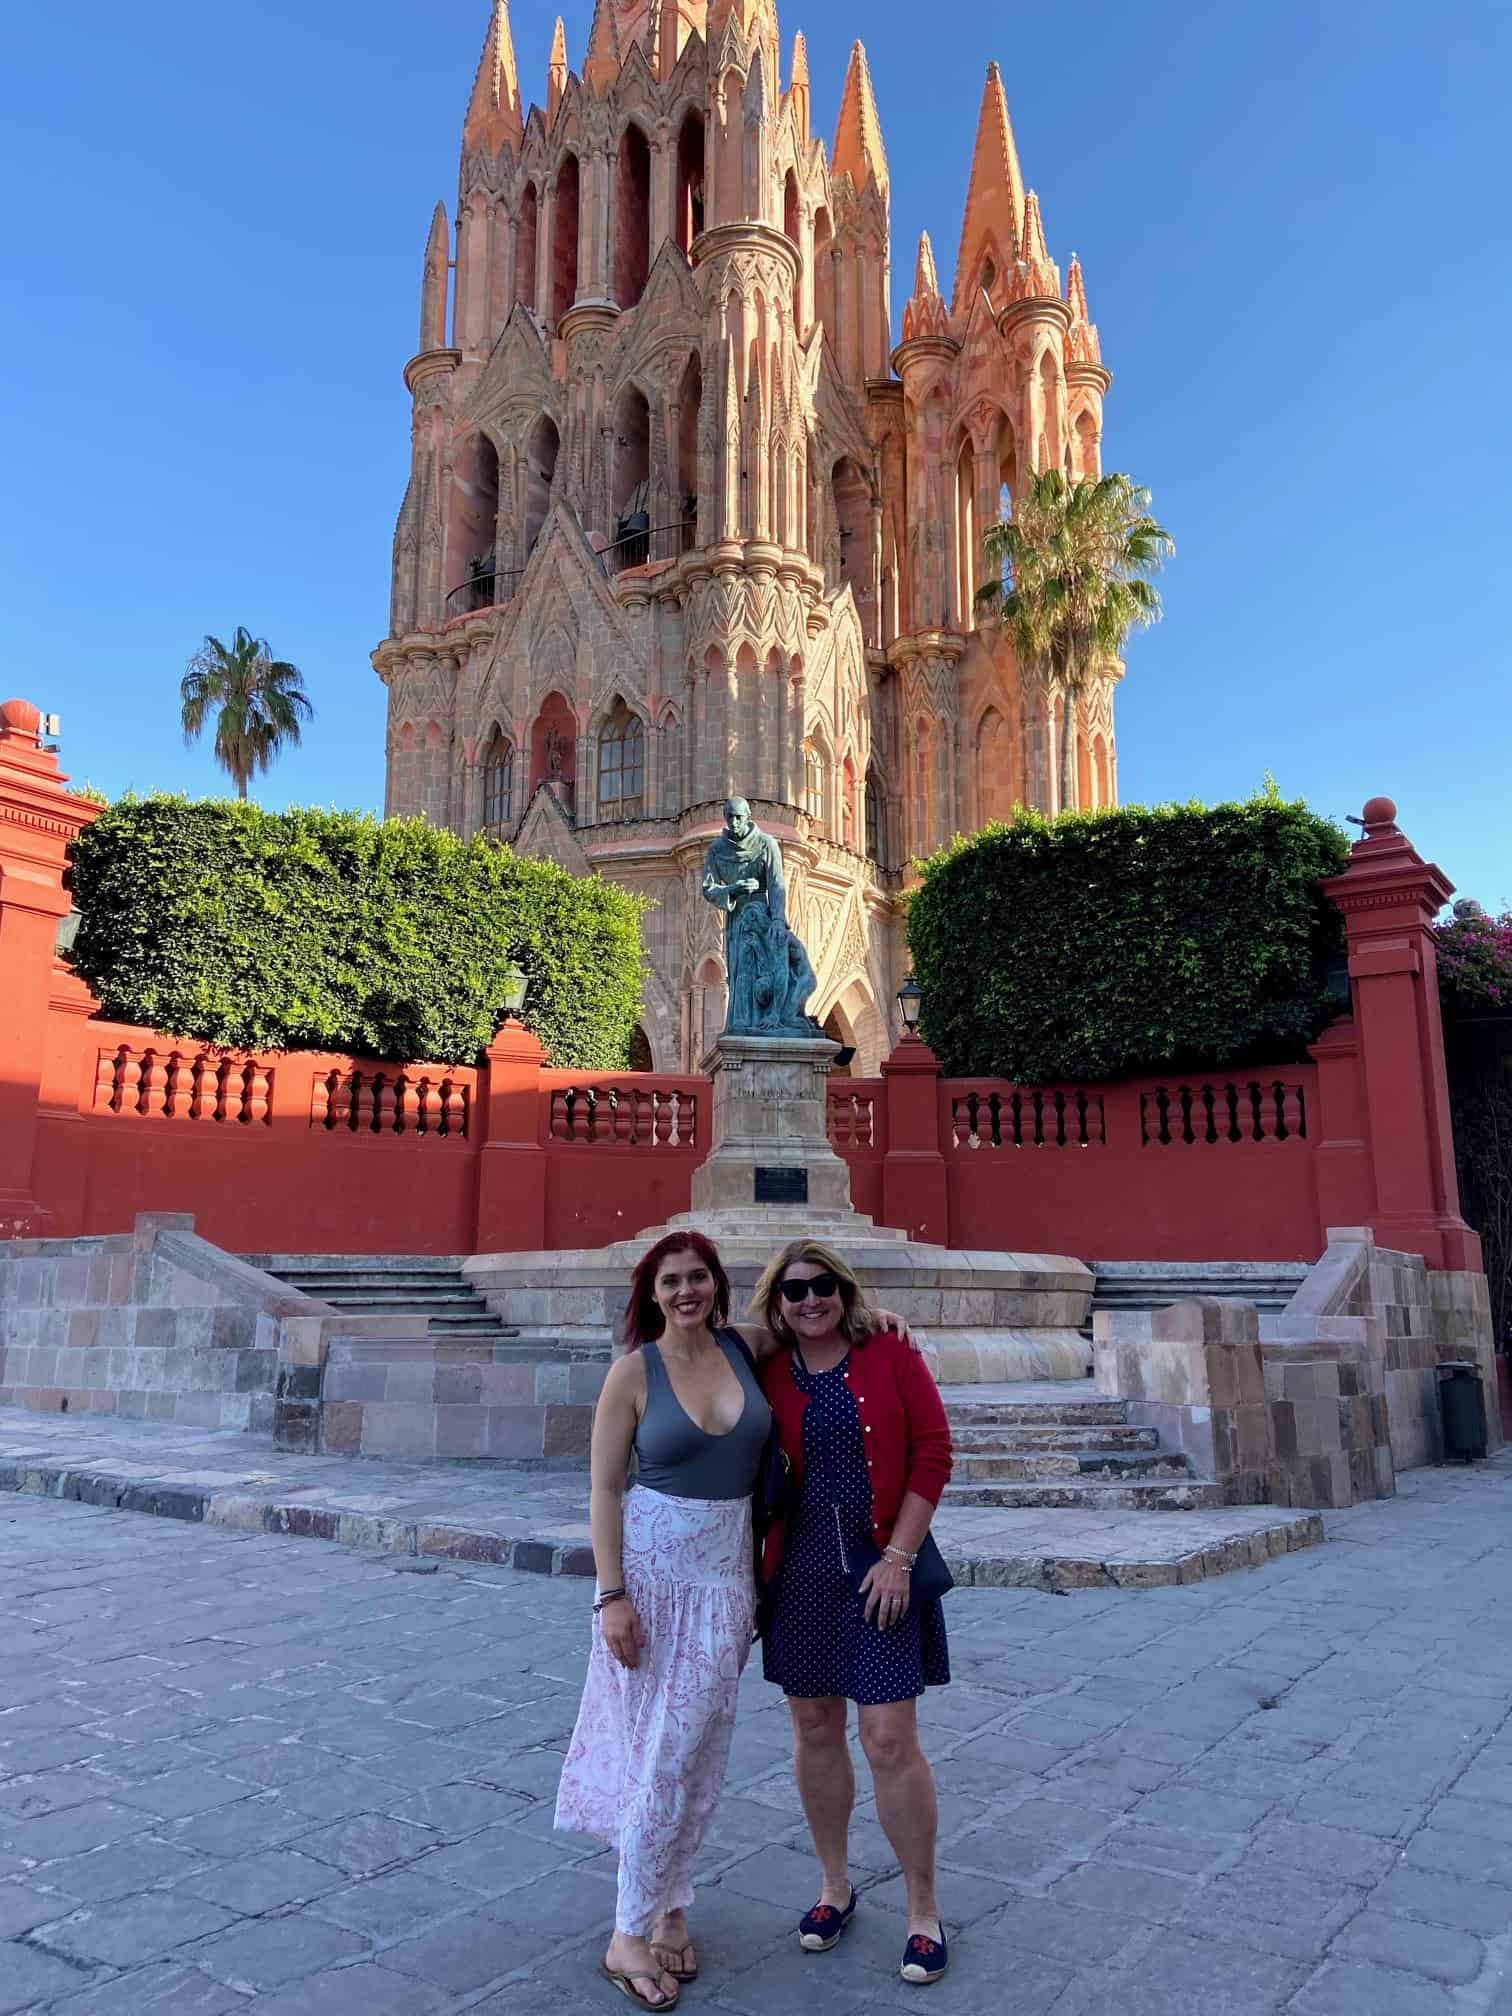 Best things to do in San Miguel de Allende Mexico - Arc Angel church